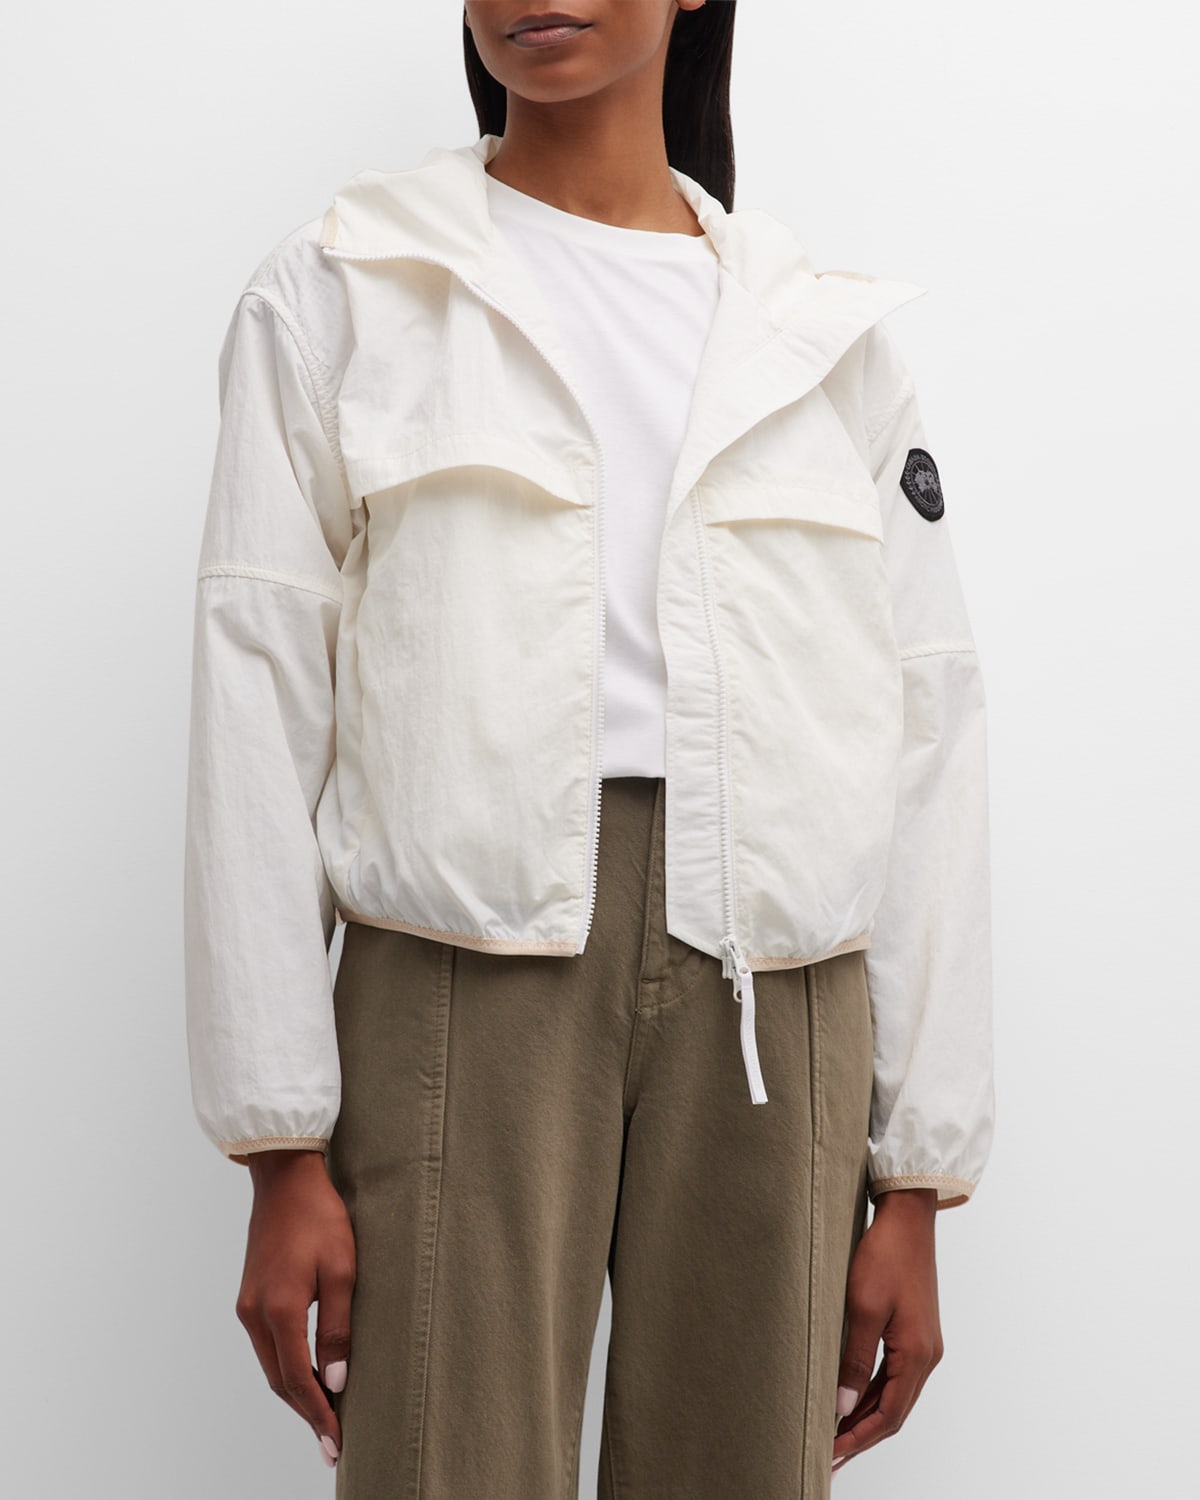 Canada Goose Sinclair Hooded Jacket With Mesh Vent In Northstar White